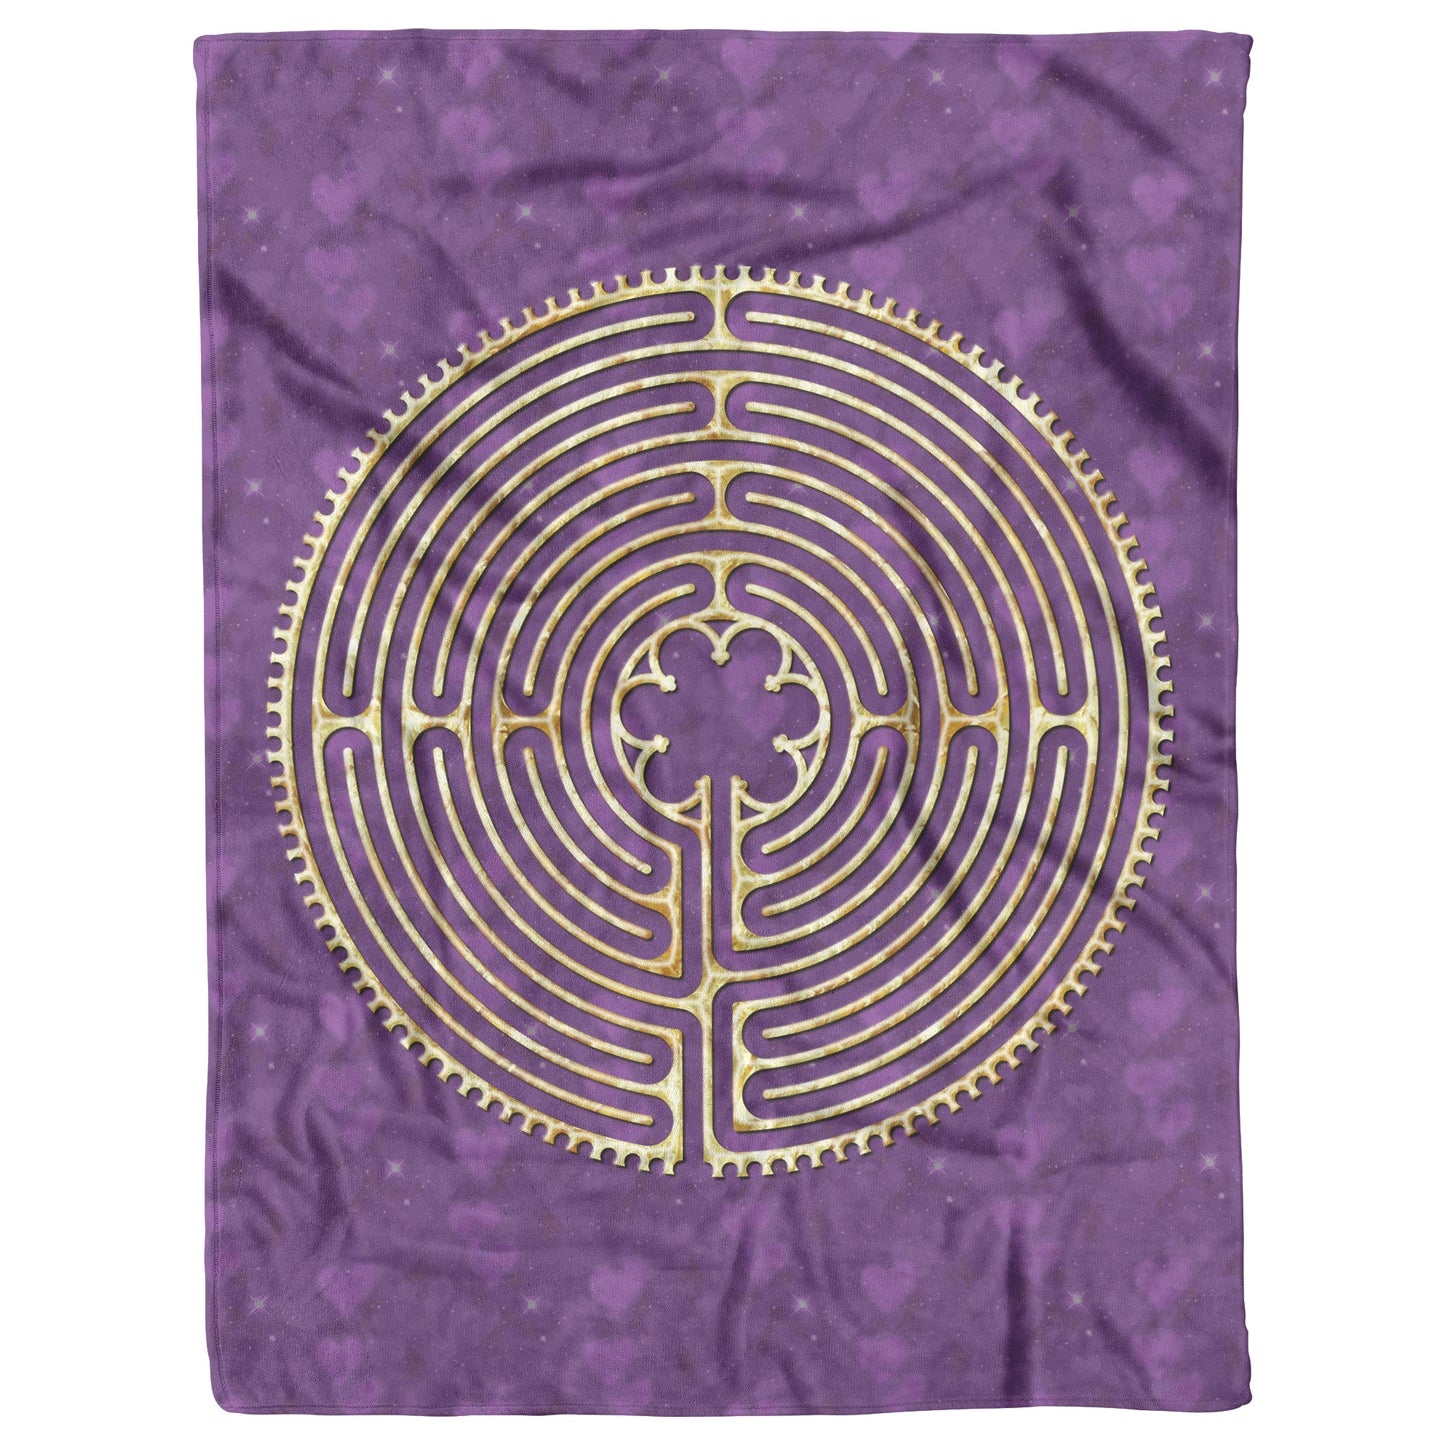 Chartres Labyrinth Therapy Blanket - Purple